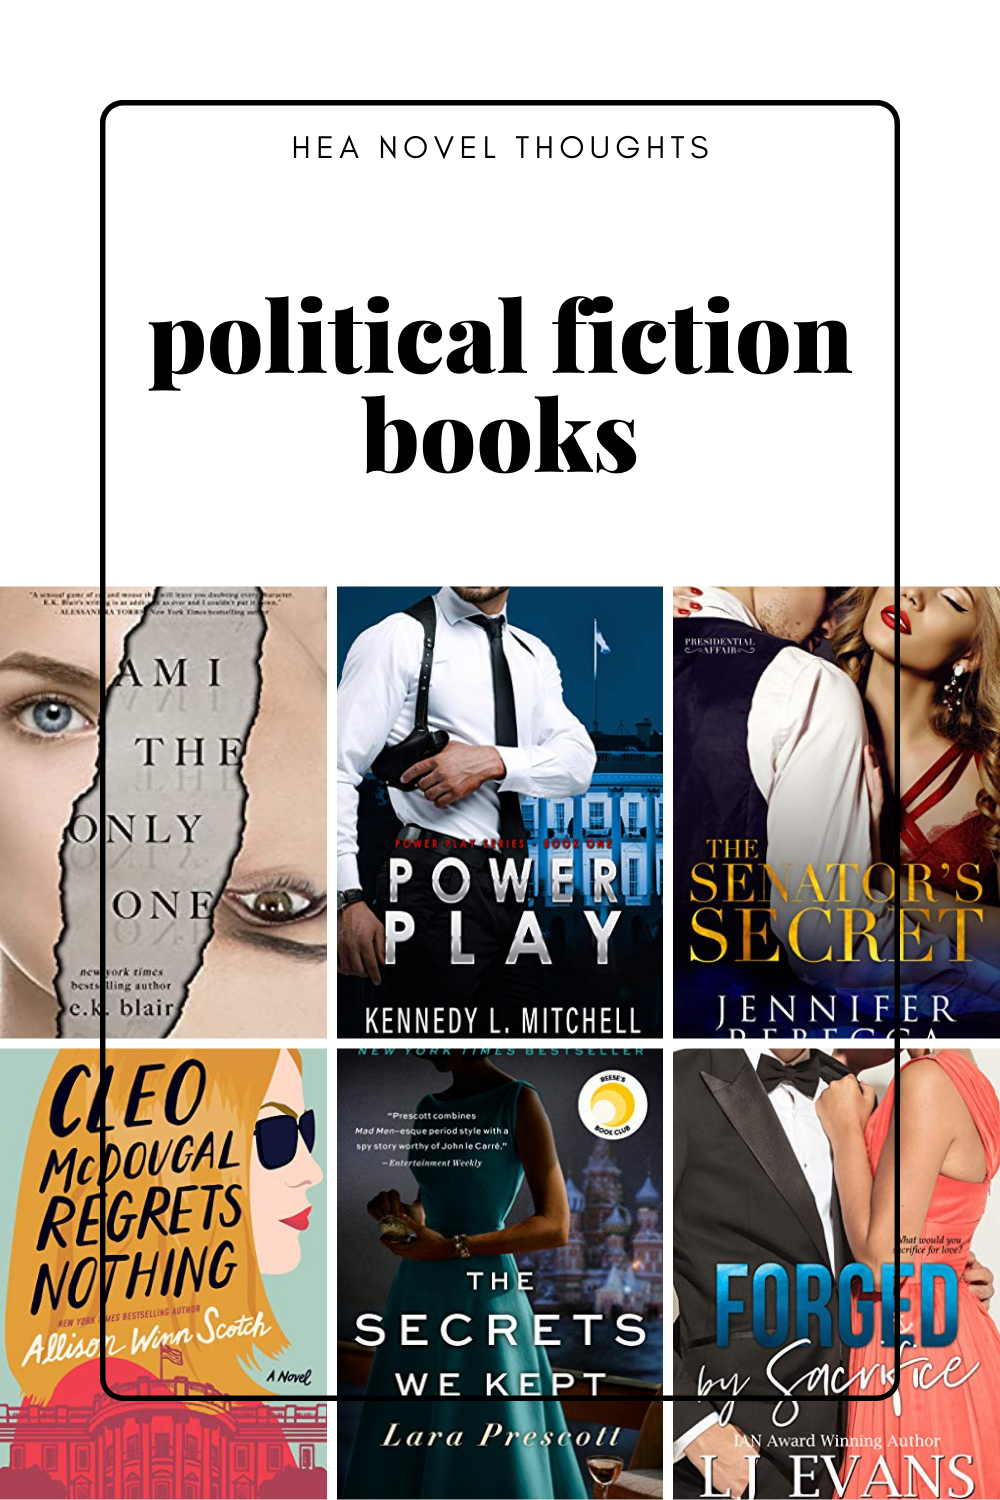 7 Political Fiction Books that Will Make You Want to Vote